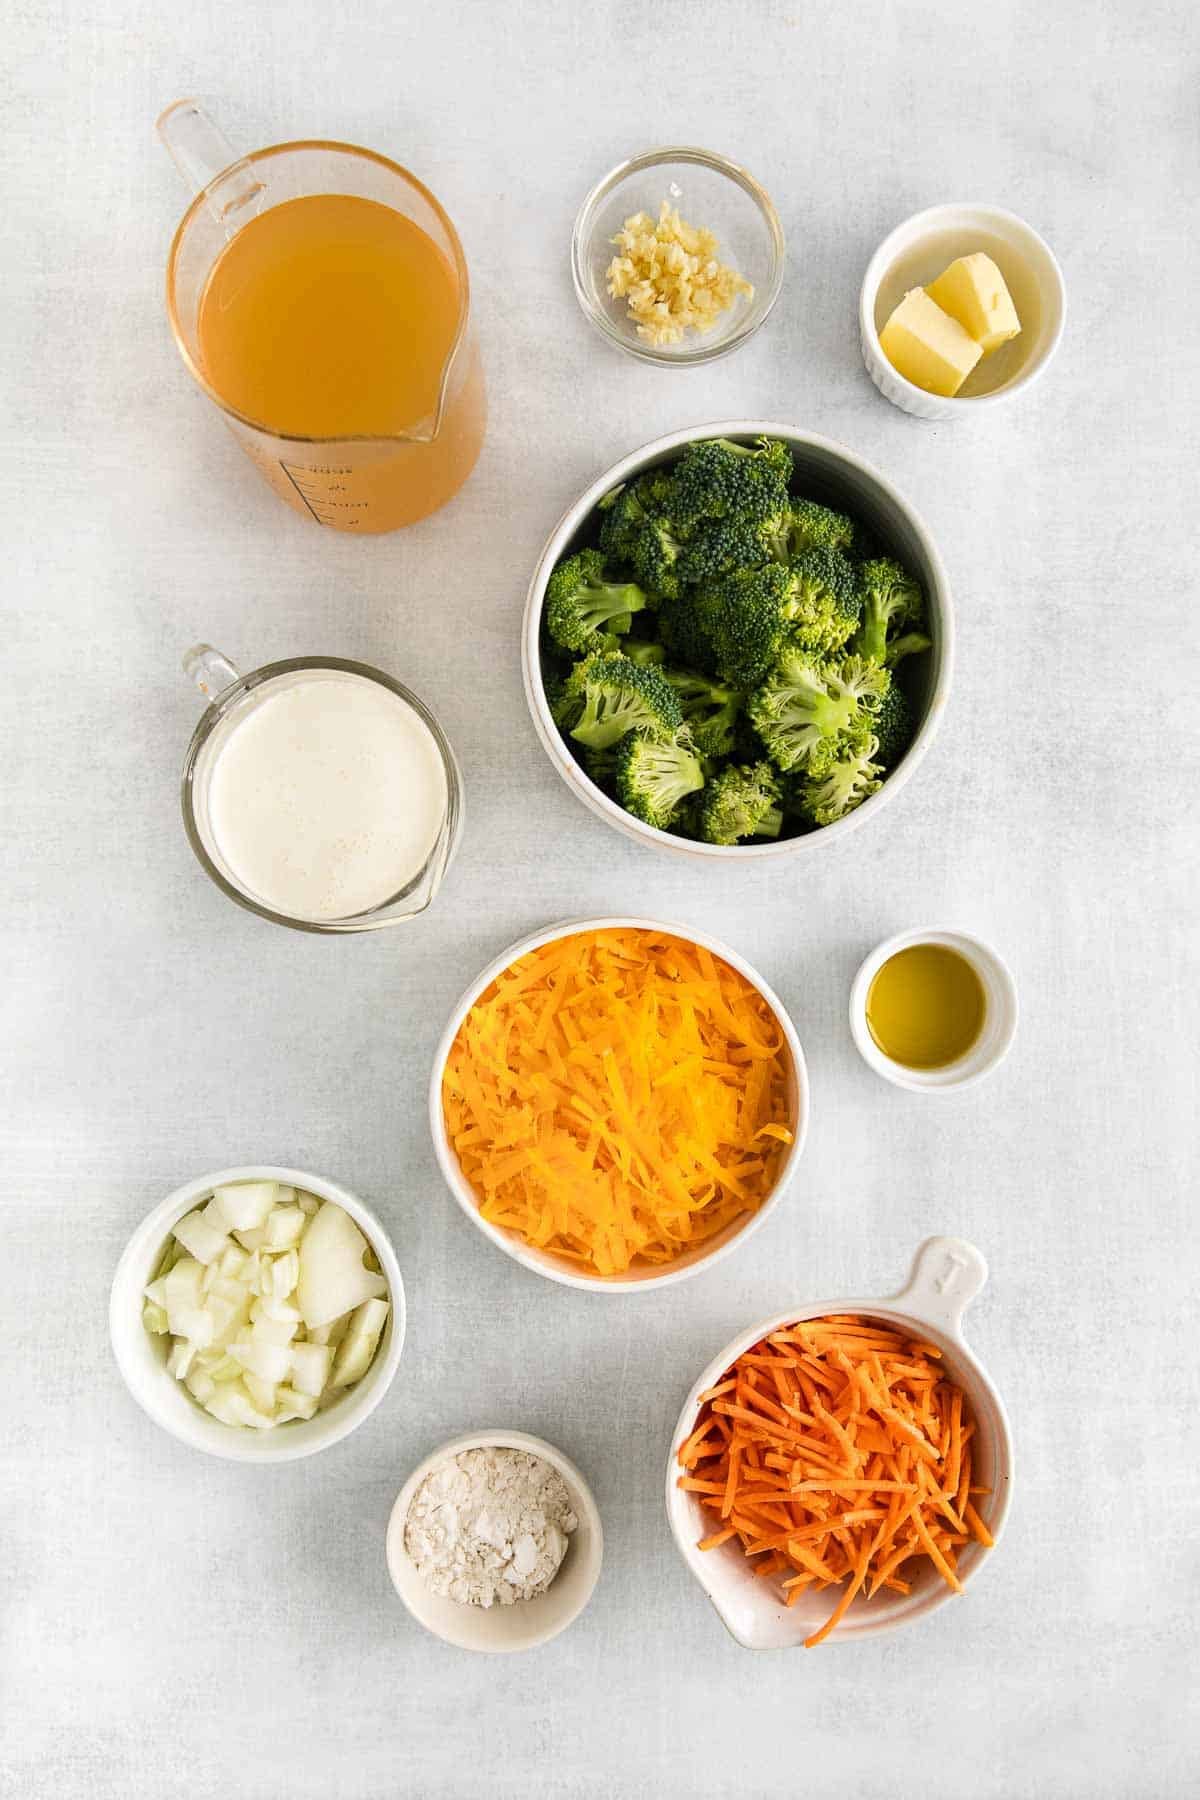 several small bowls with ingredients for broccoli cheddar cheese soup - broccoli florets, shredded cheddar cheese, shredded carrots, diced onions, chicken broth, cream, butter and four.